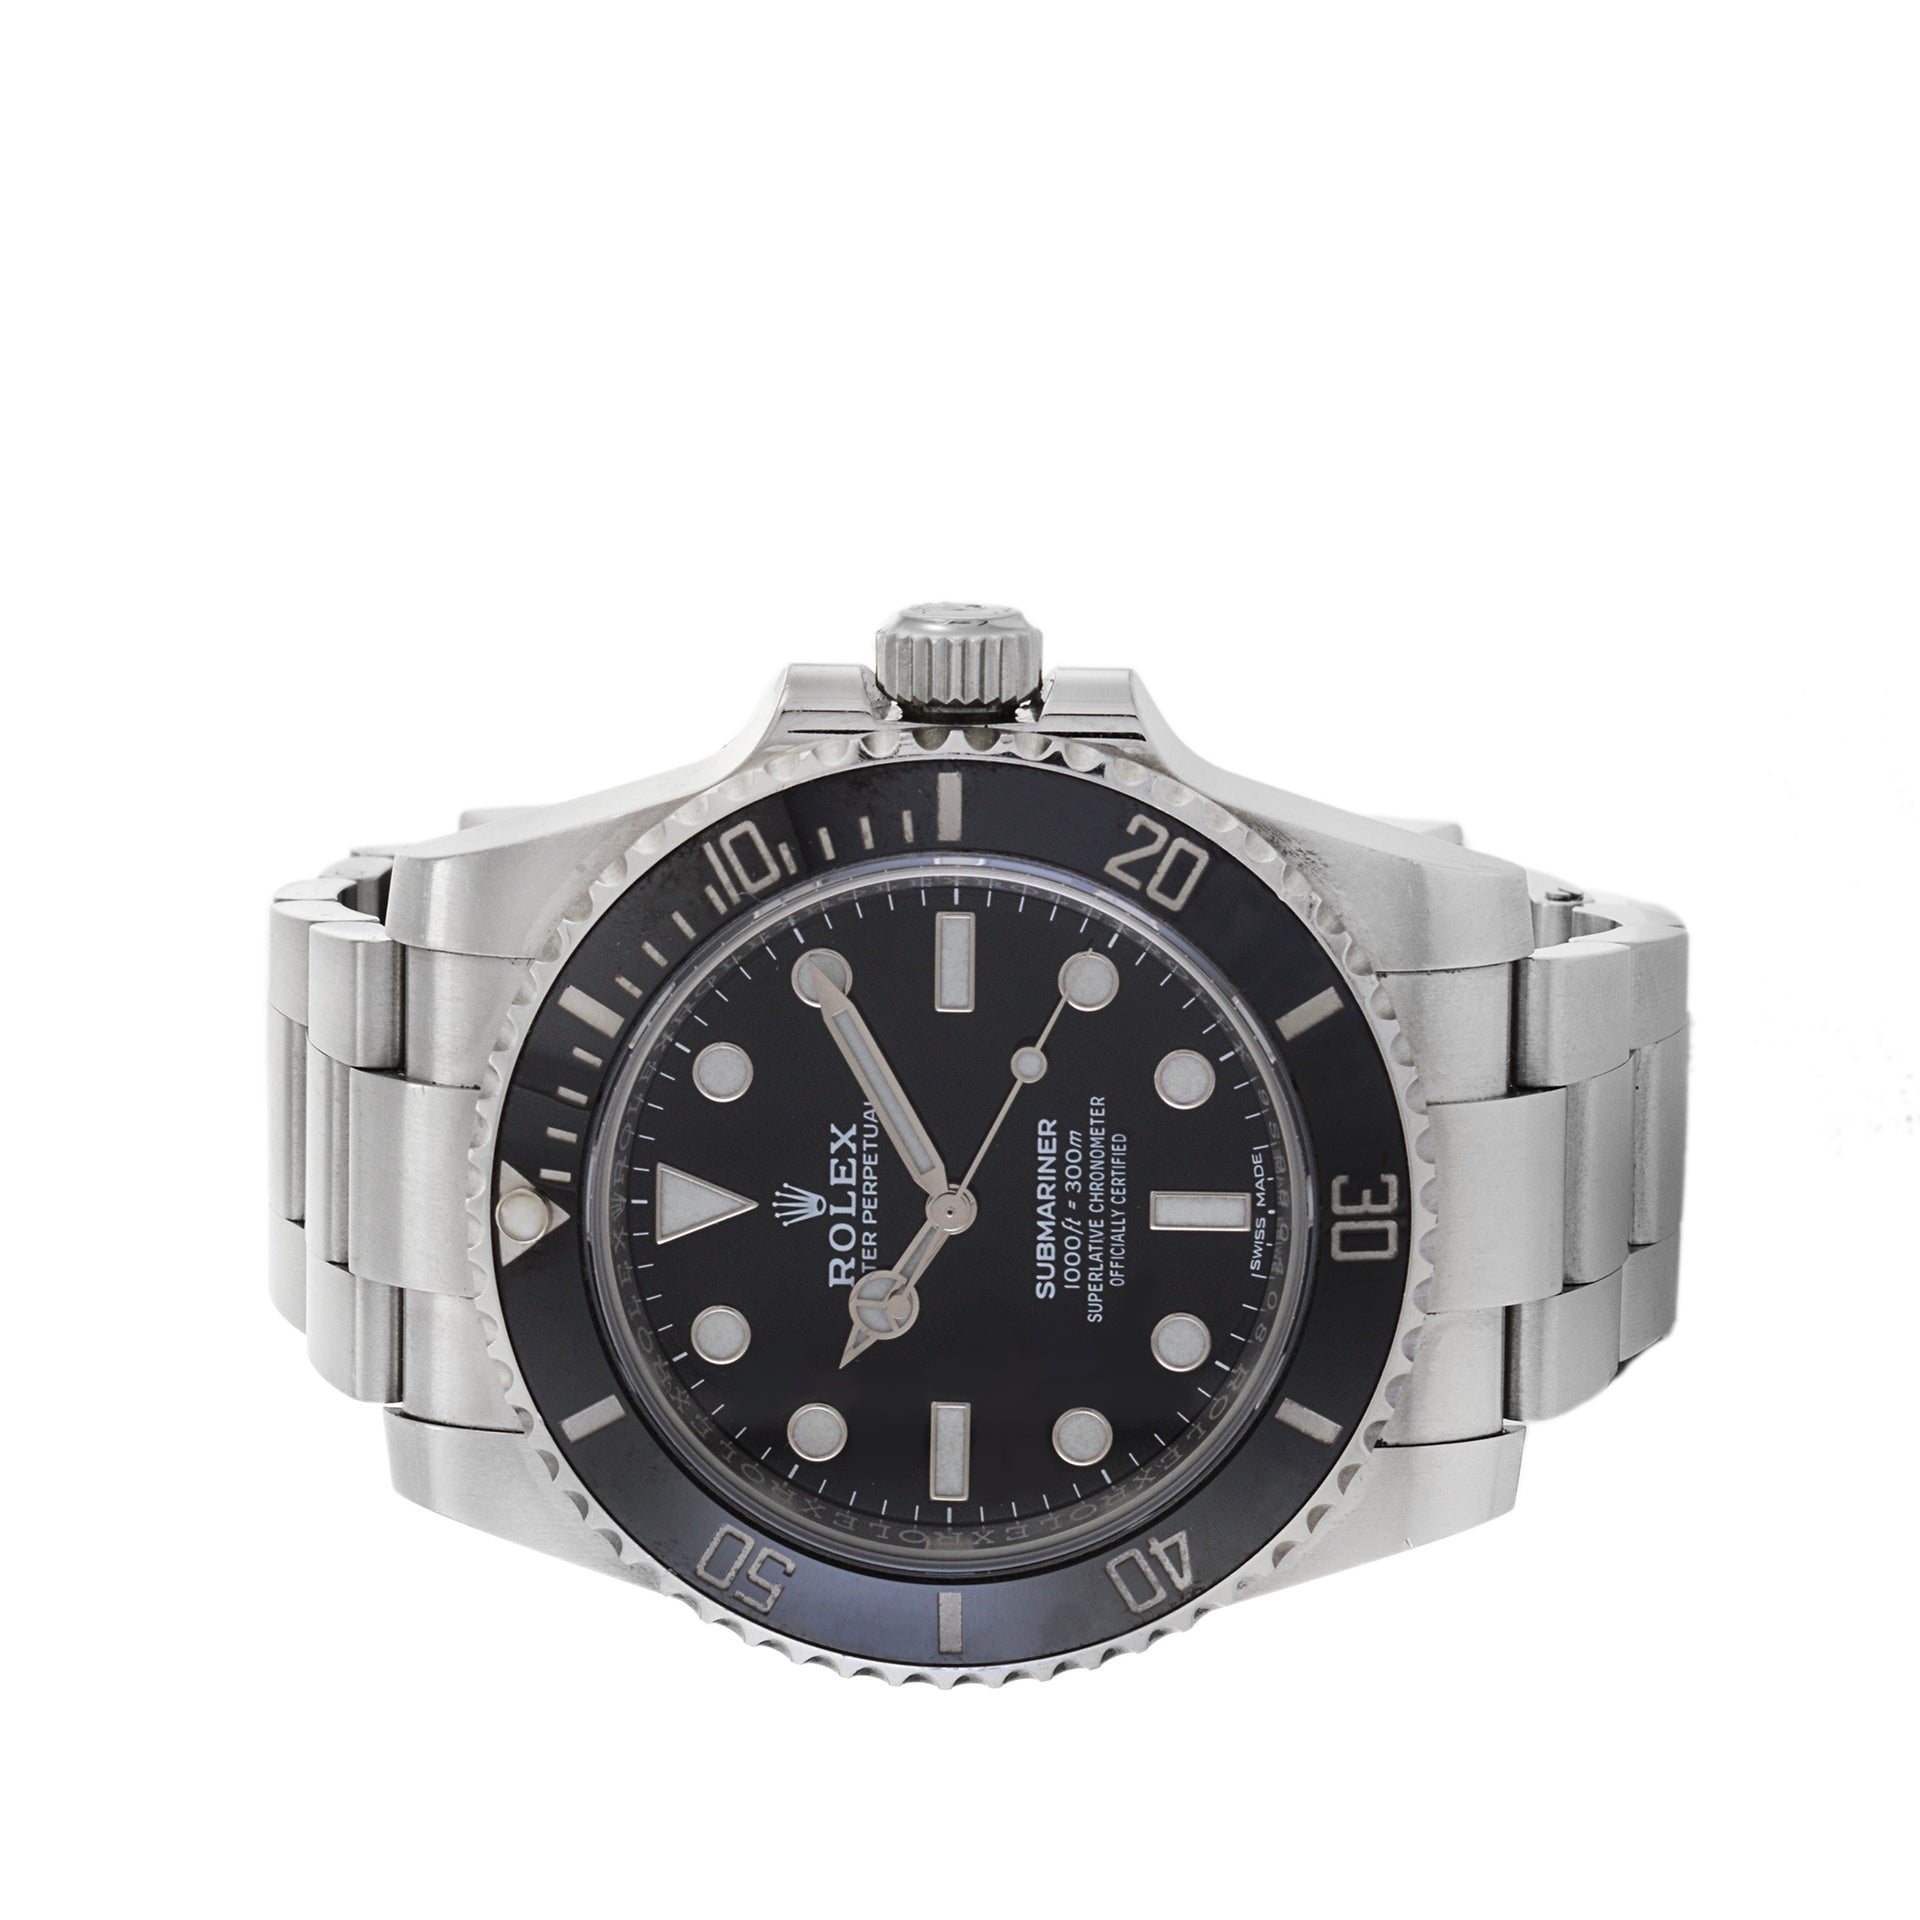 Rolex Submariner Reference 114060